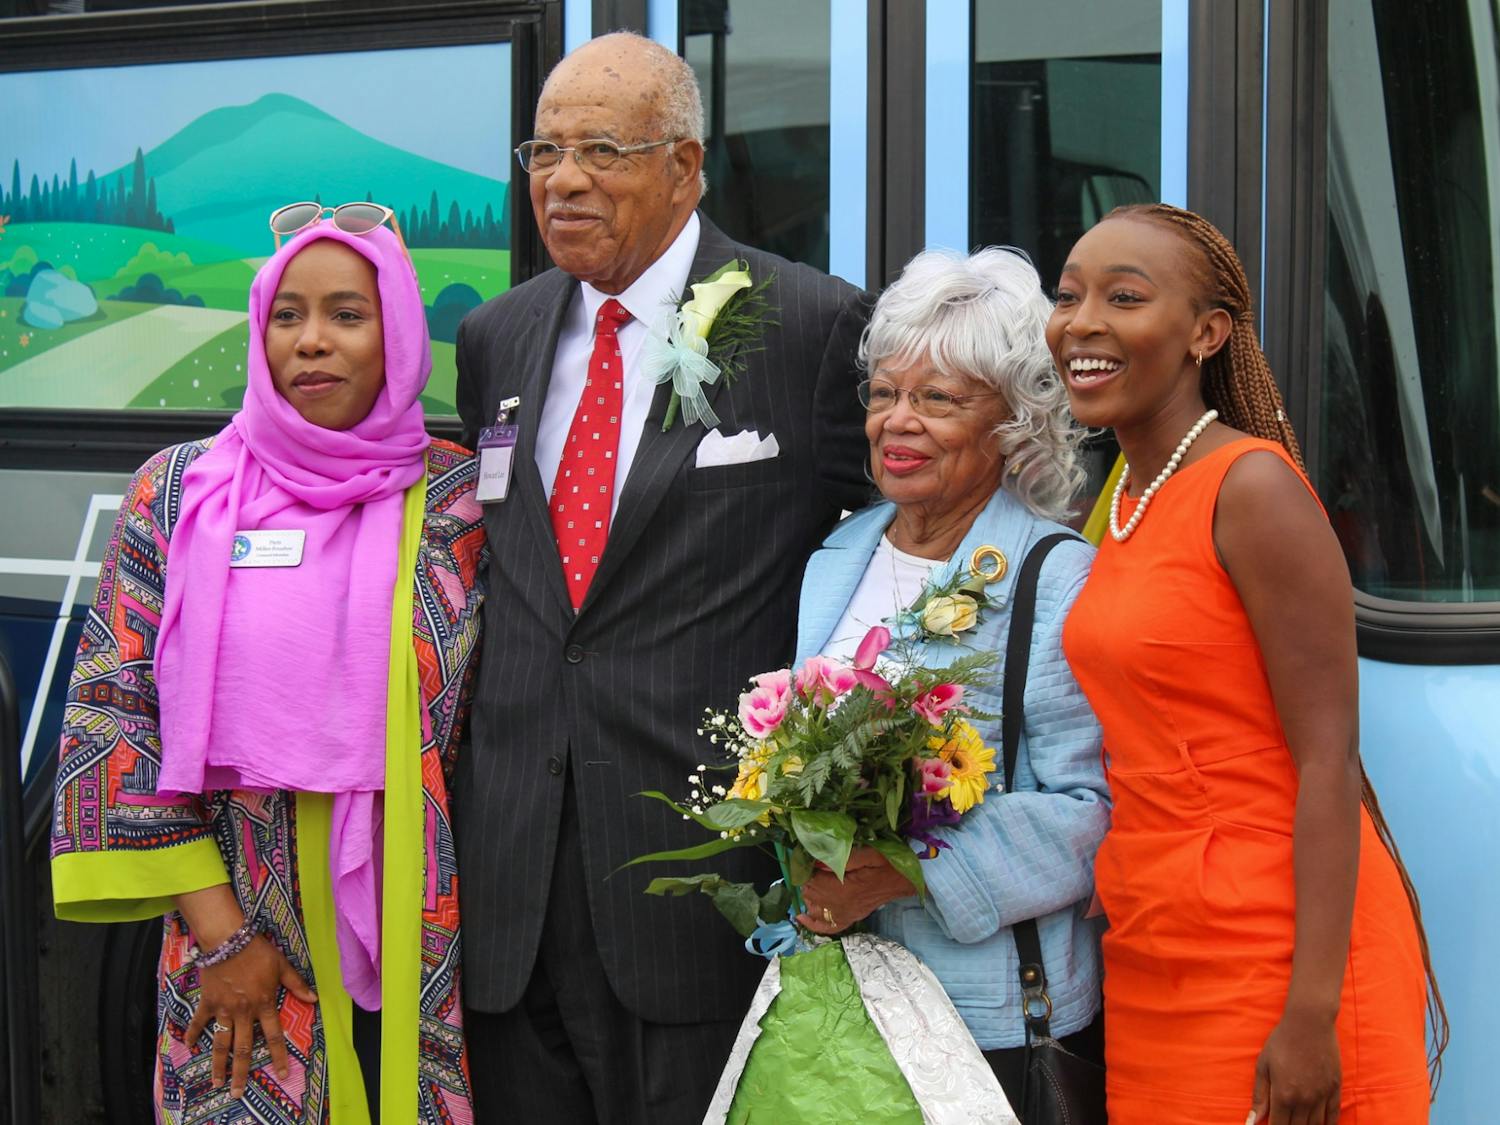 The Town of Chapel Hill renamed the Chapel Hill Transit Facility after former Chapel Hill Mayor and state Senator Howard Lee and his wife Lillian Lee at a ceremony on Monday, June 21, 2022. Paris Miller-Foushee, Howard Lee, Lillian Lee and Teddy Vann gather after the ceremony.&nbsp;